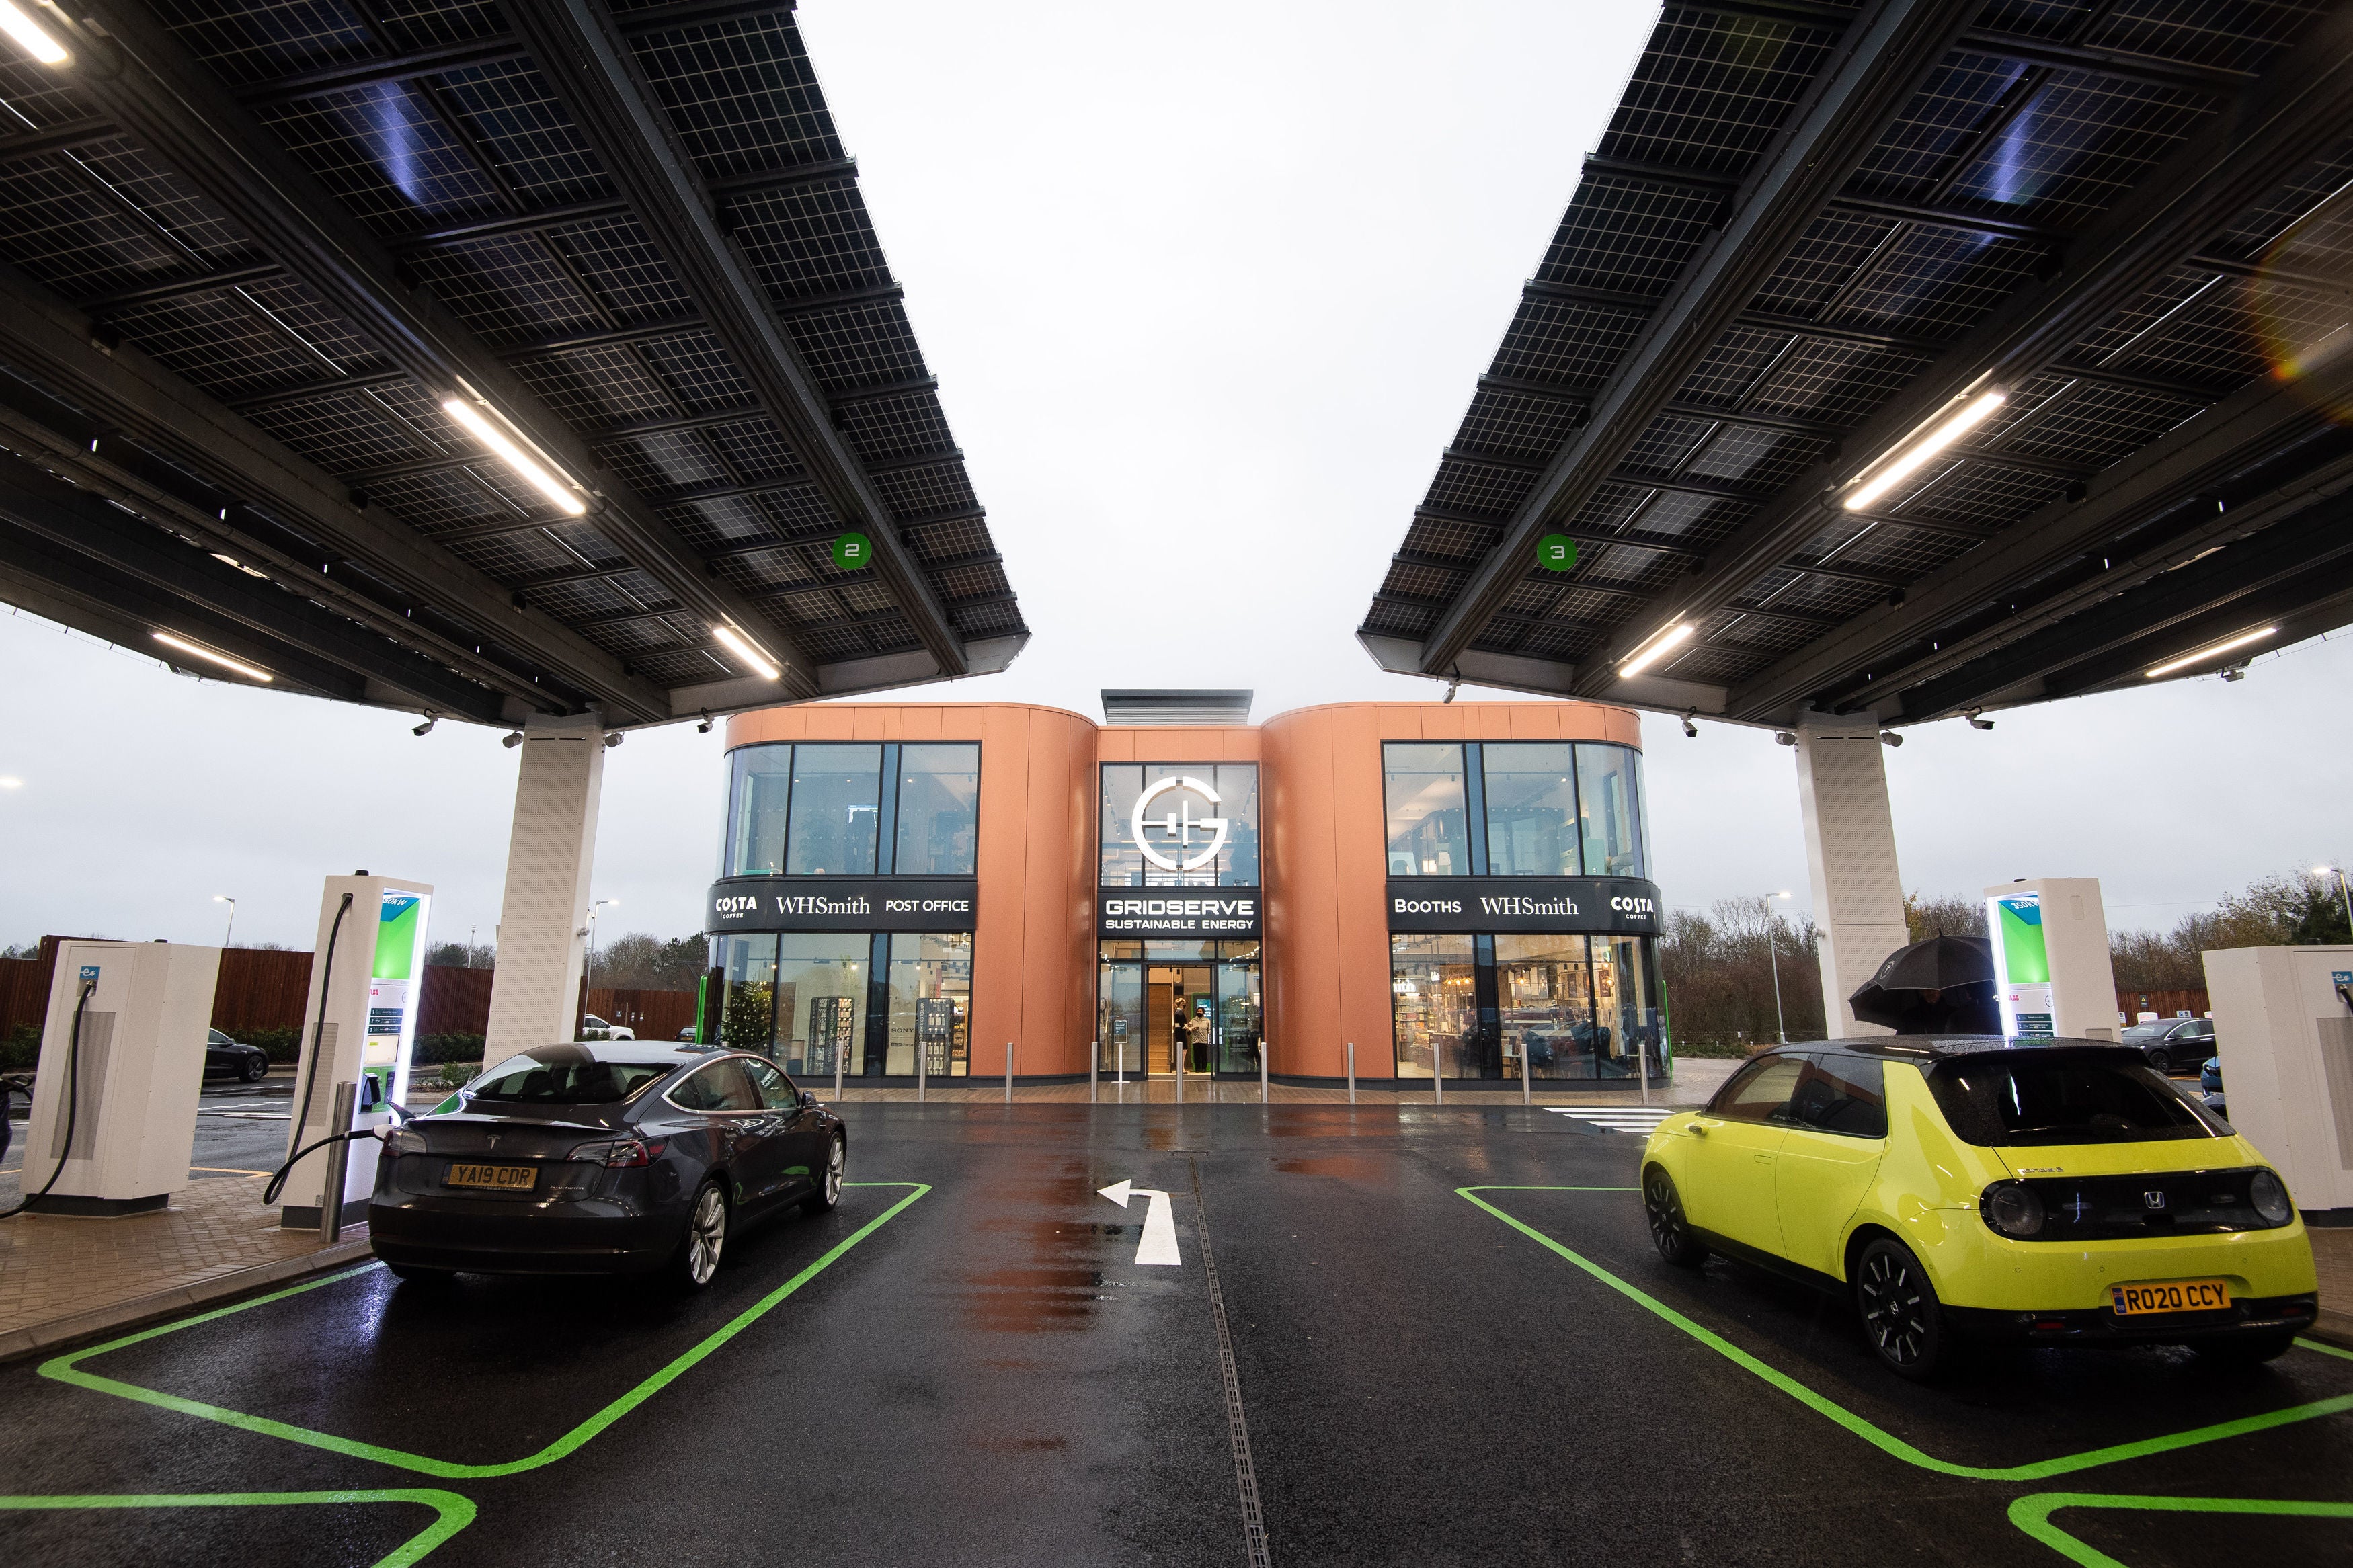 Vehicles are pictured at the new Gridserve all-electric forecourt in Braintree, Essex.